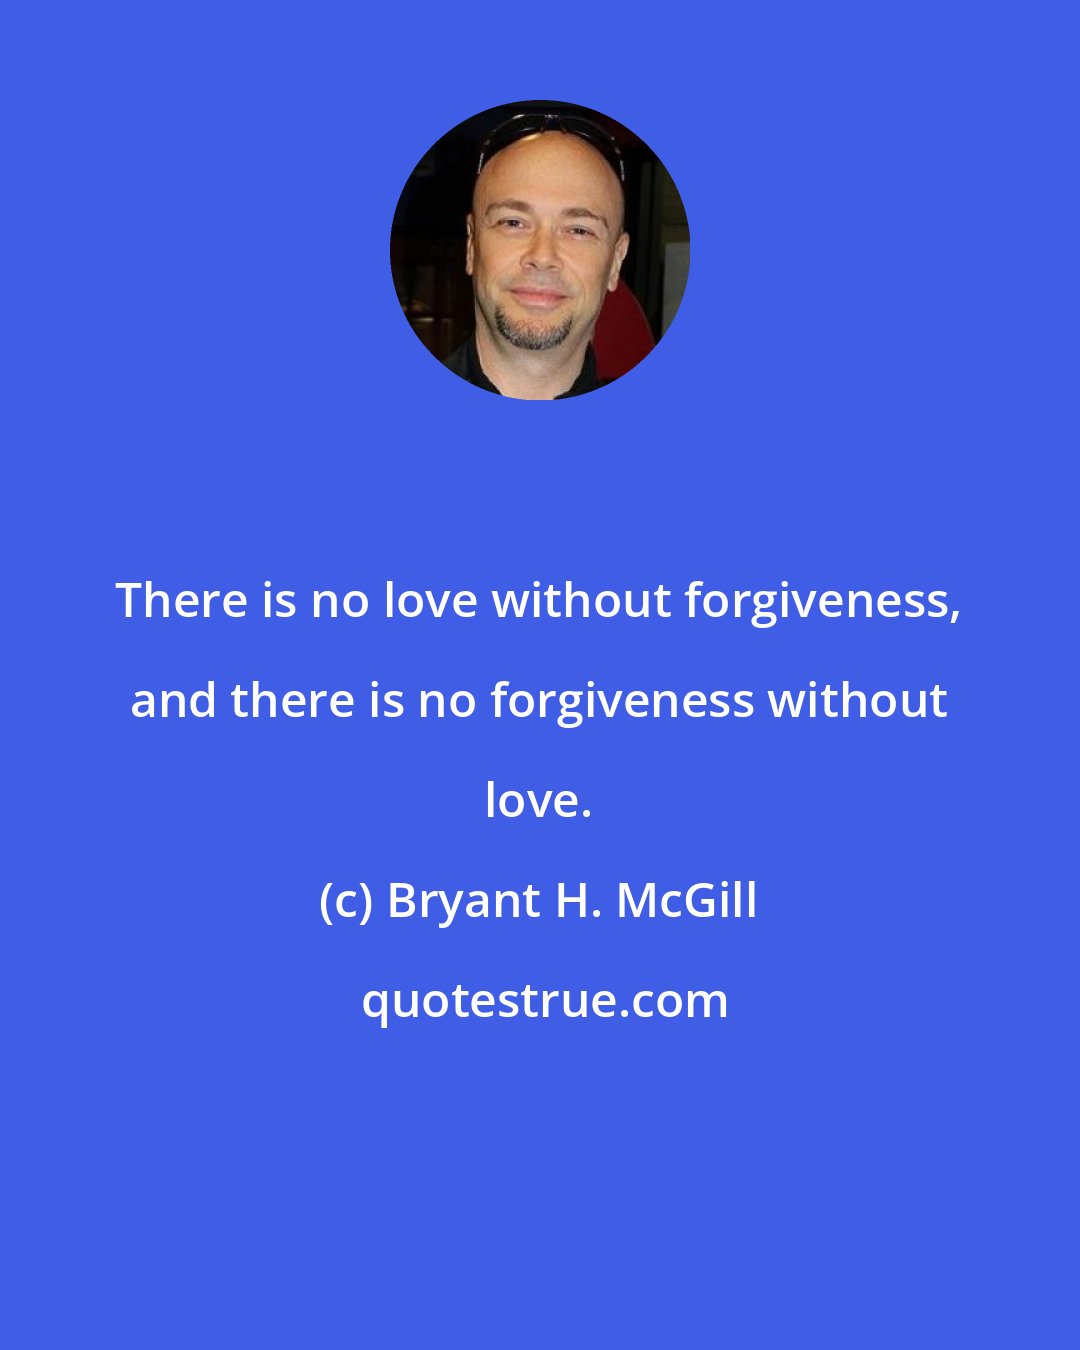 Bryant H. McGill: There is no love without forgiveness, and there is no forgiveness without love.